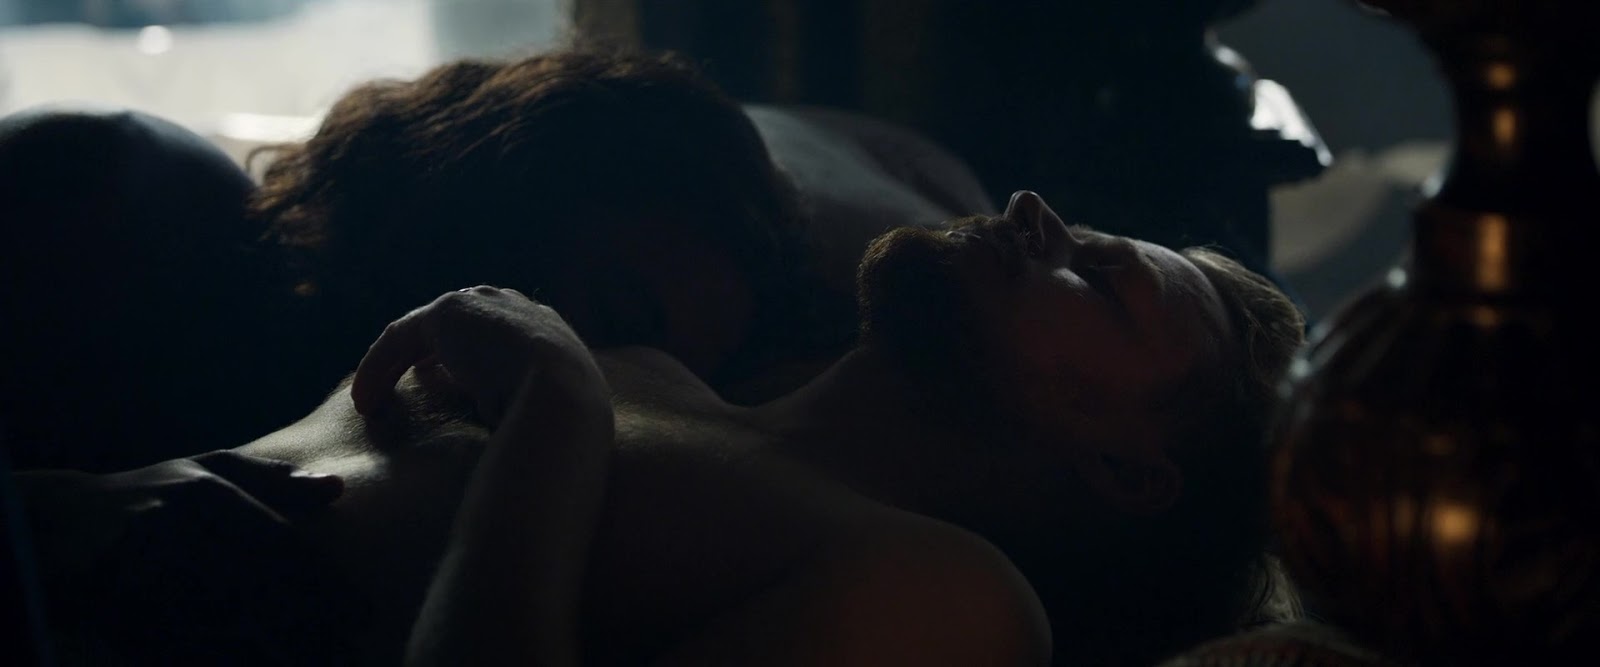 Ismael Cruz Córdova nude and Jack Lowden shirtless in Mary Queen Of Scots.